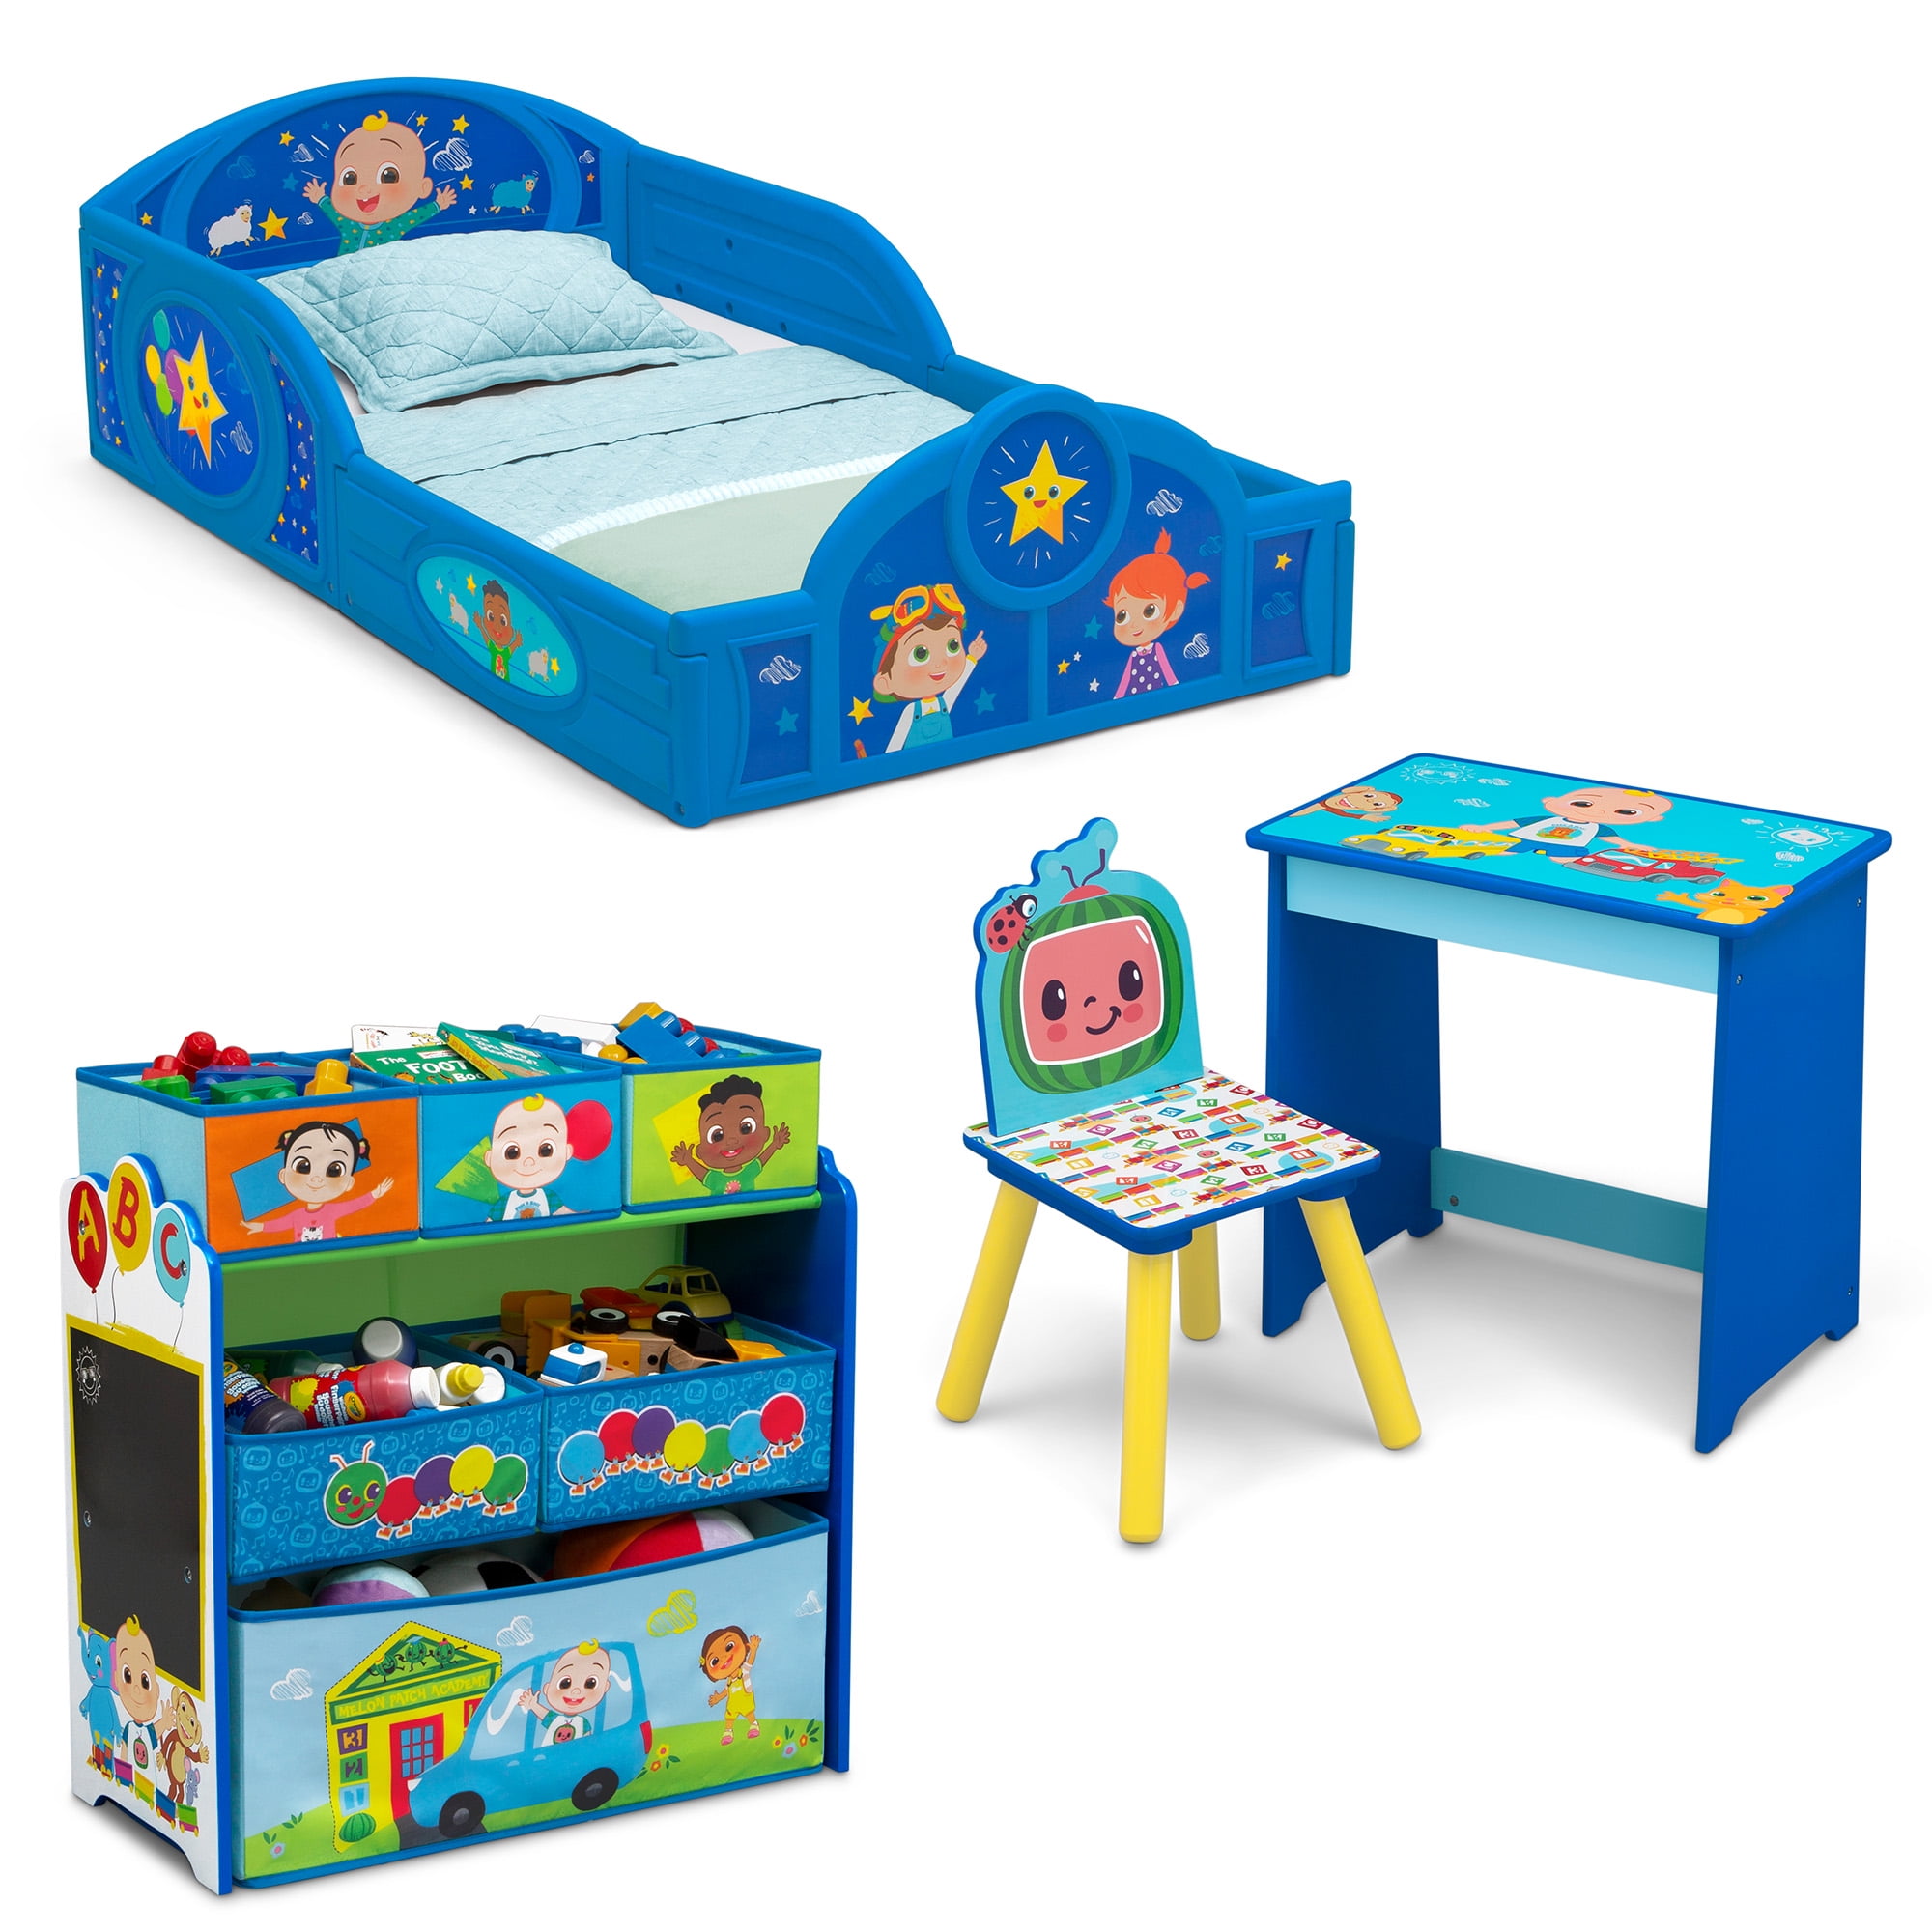 Cocomelon 4-Piece Room-in-a-Box Bedroom Set by Delta Children - Includes  Sleep & Play Toddler Bed, 6 Bin Design & Store Toy Organizer and Art Desk  with Chair - Walmart.com